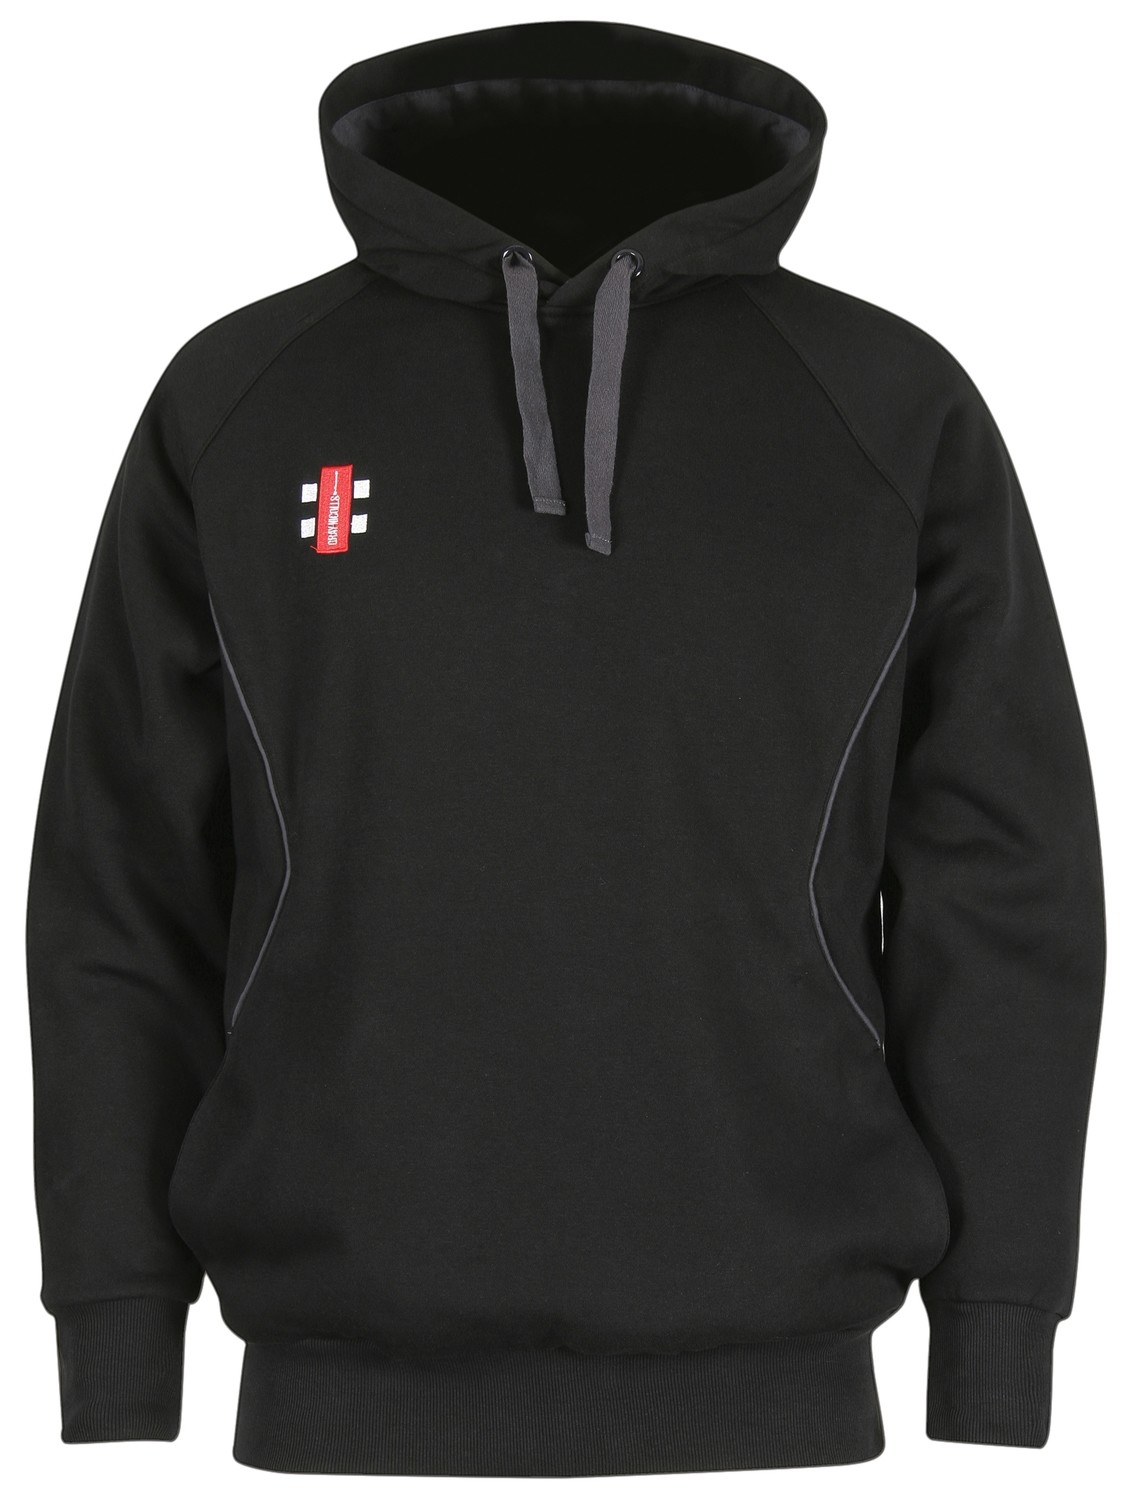 Kirby & Great Broughton Storm Hooded Top